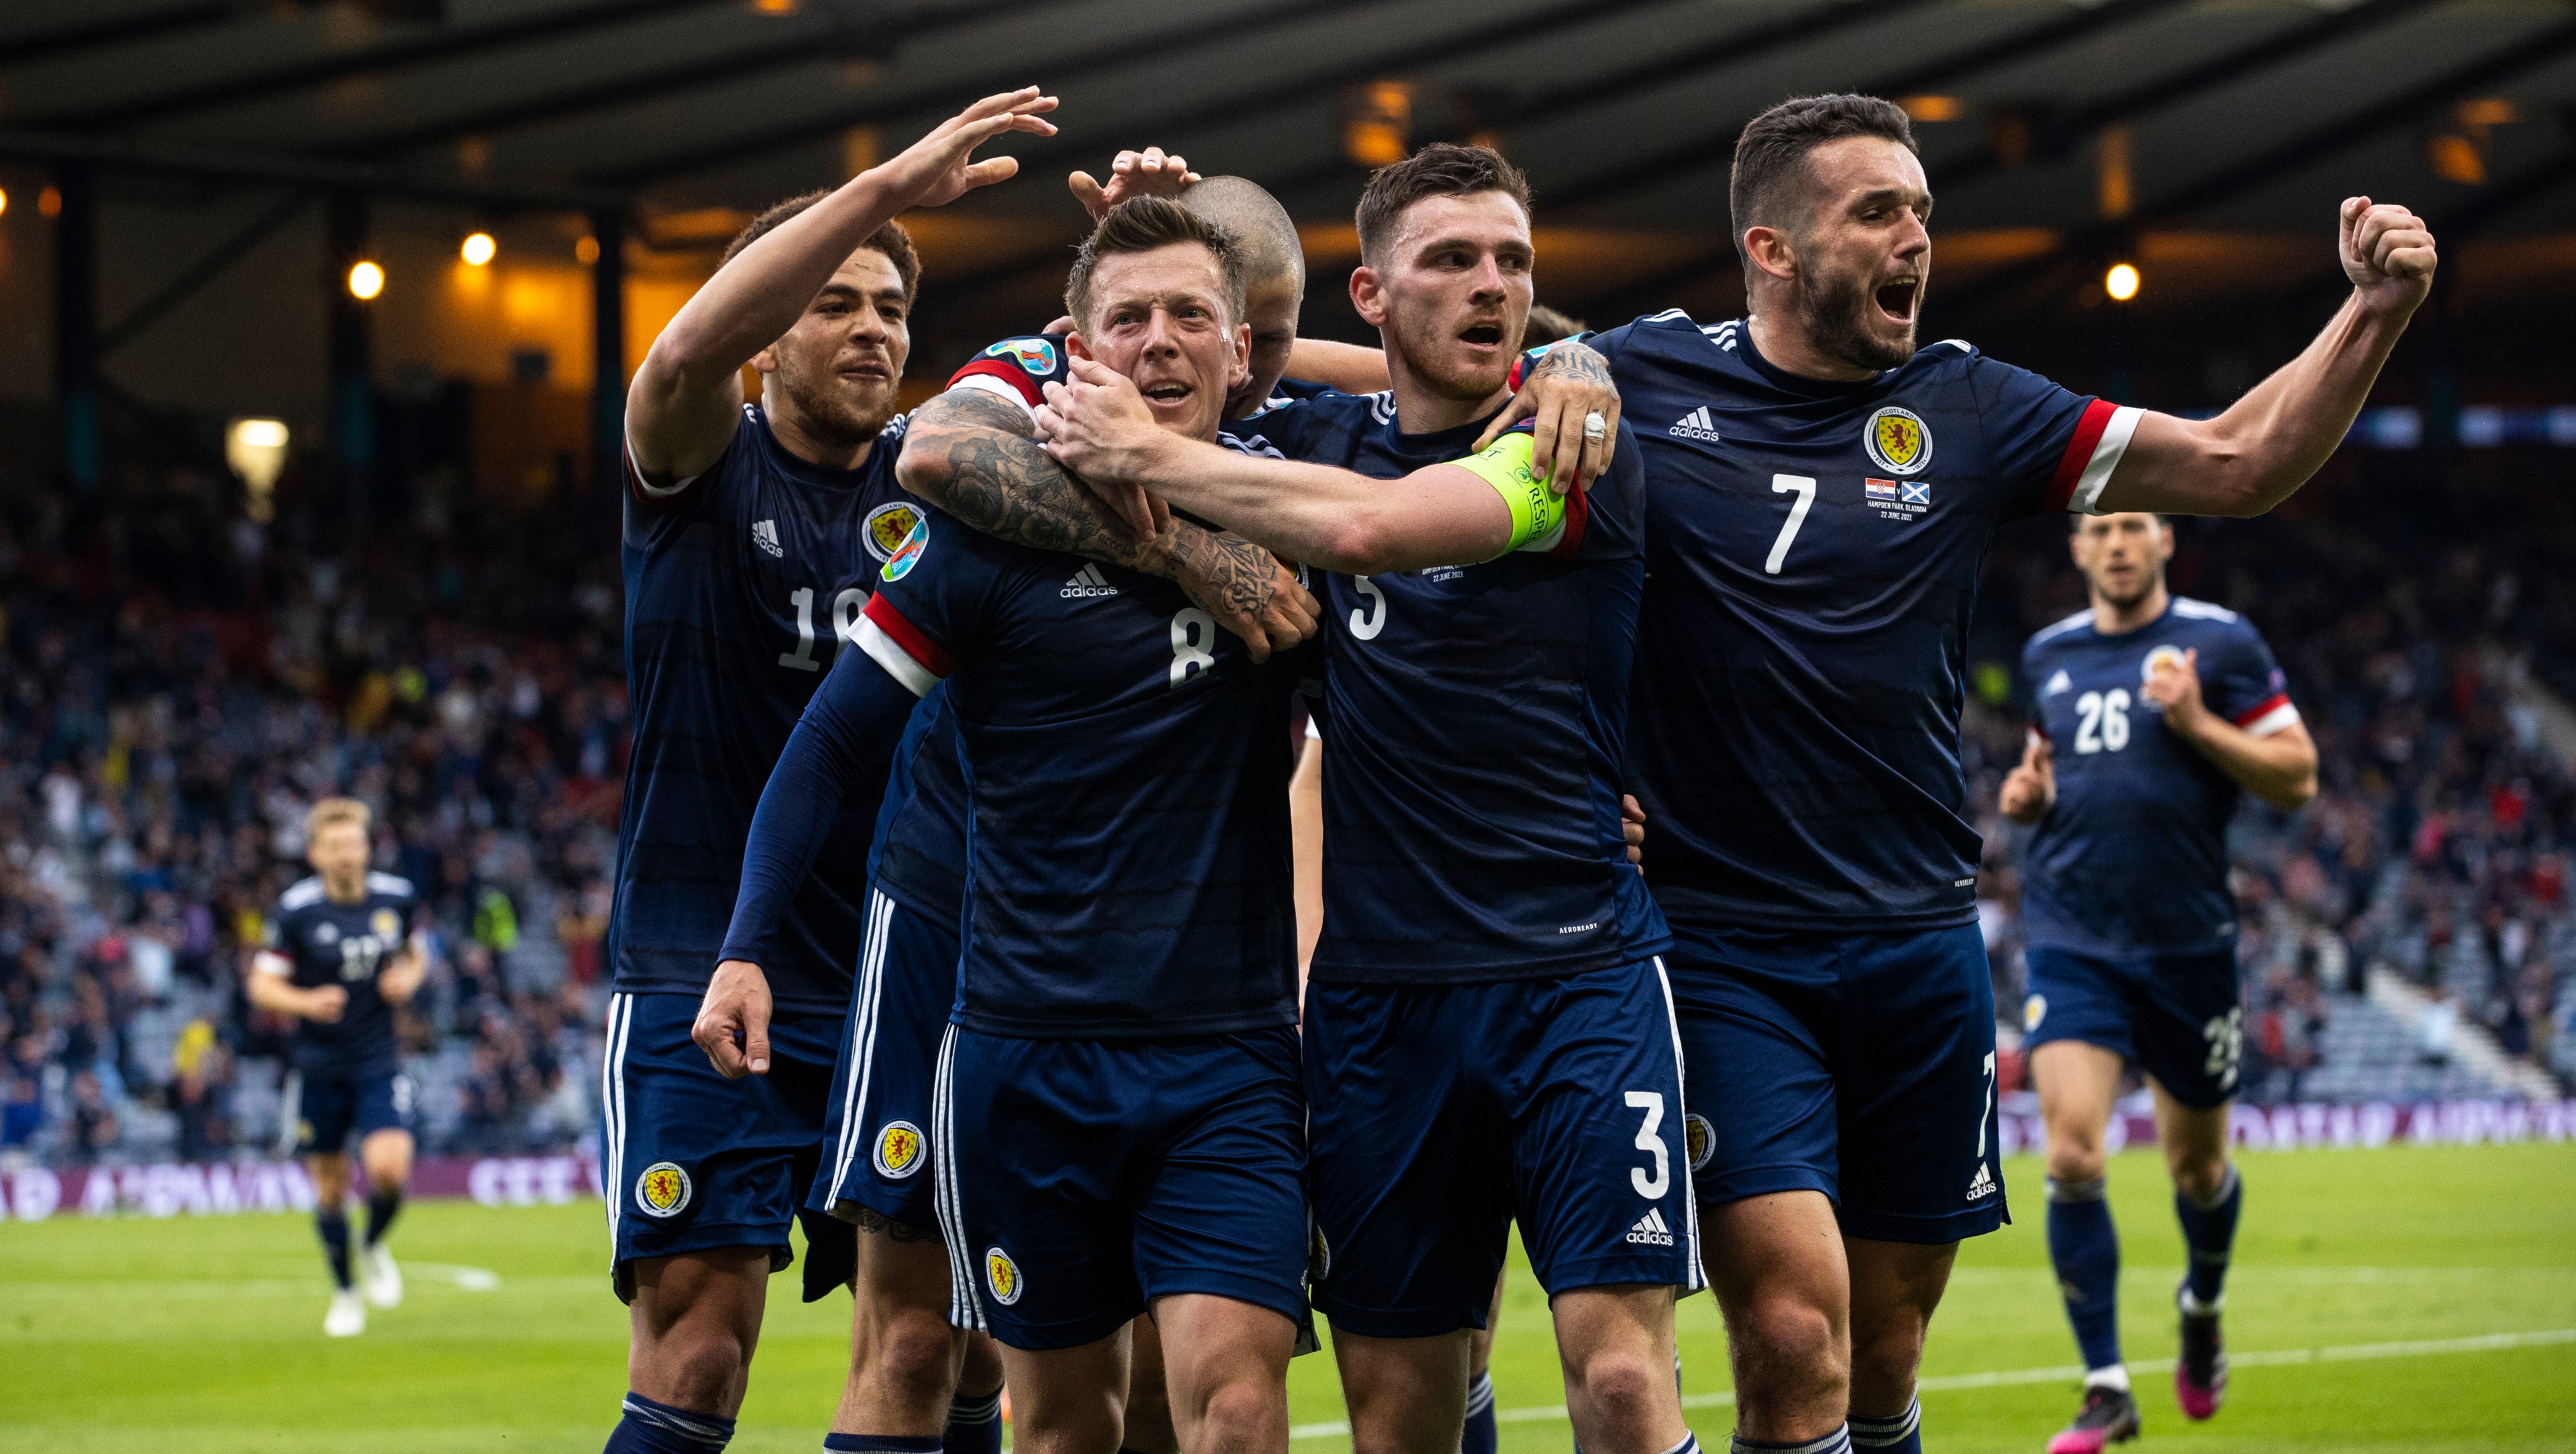 GLASGOW, SCOTLAND - JUNE 22: Callum McGregor celebrates after scoring to make it 1-0 Scotland during a Euro 2020 match between Croatia and Scotland at Hampden Park, on June 22, 2021, in Glasgow, Scotland. (Photo by Alan Harvey / SNS Group)